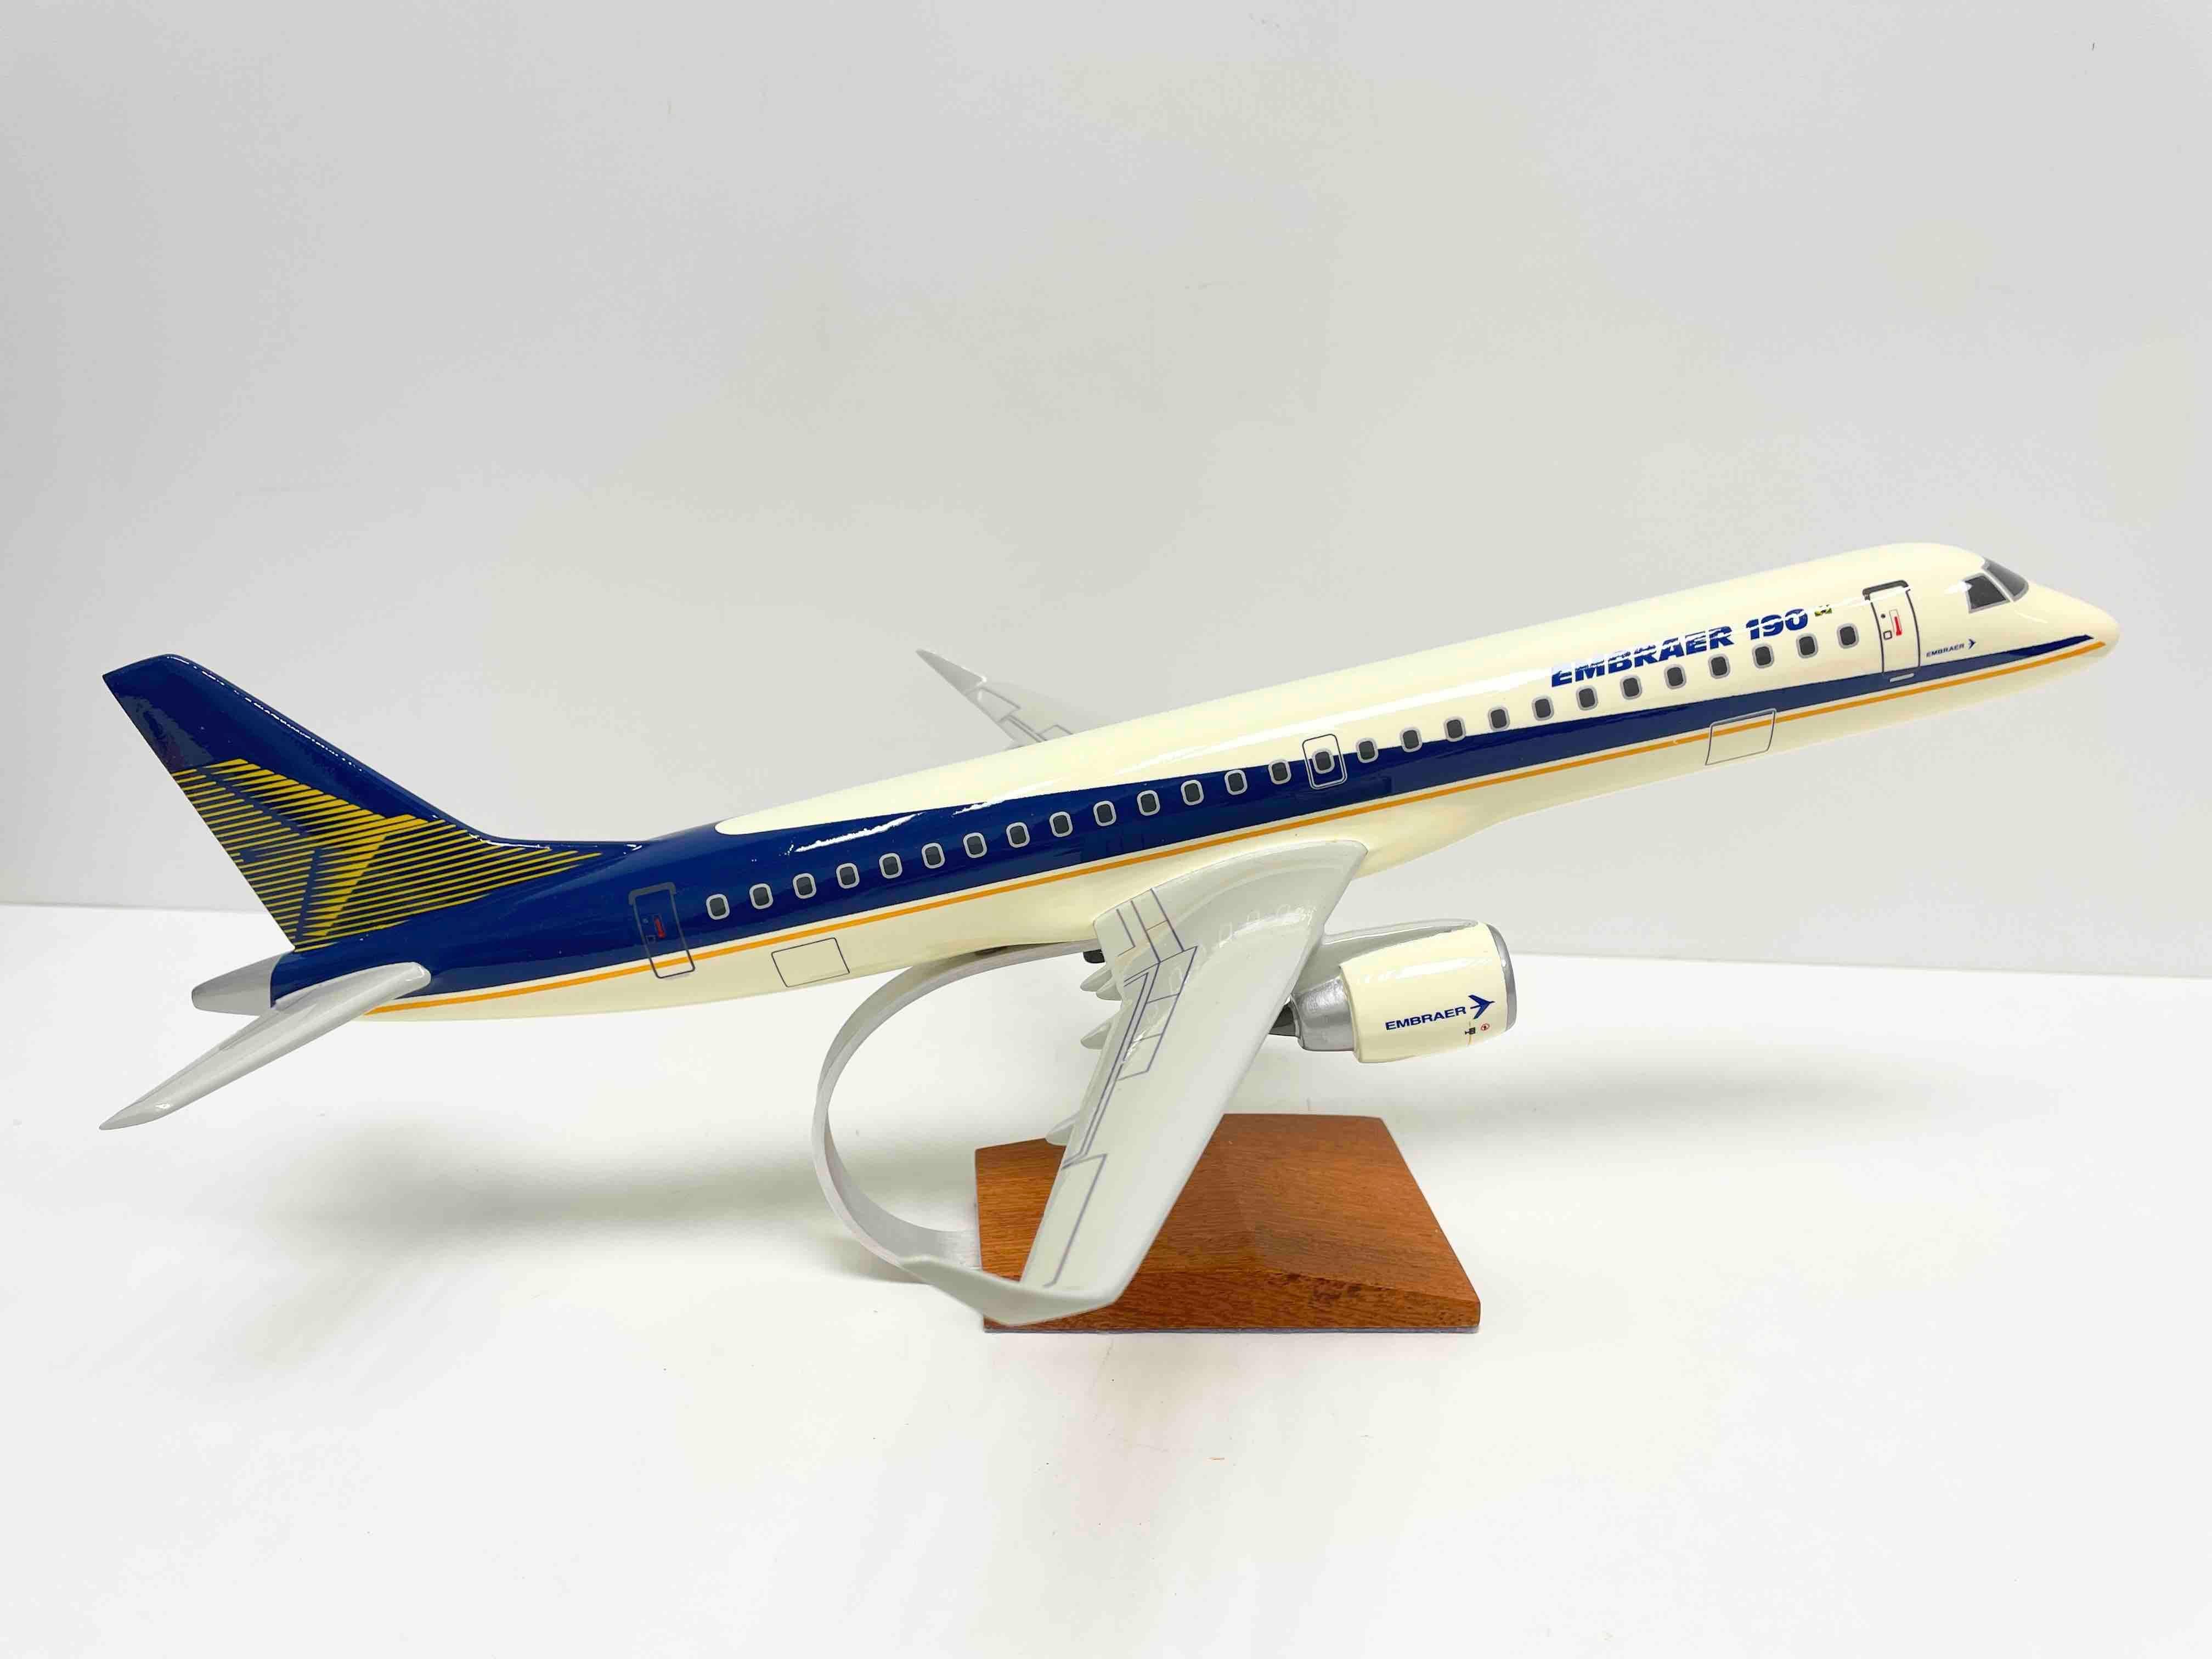 Scaled model of the Embraer 190 Jet. Made of Wood in the Scale of 1/75. This exquisite Embraer 190 Model is handcrafted by a master craftsmen from the finest Wood. Attention is given to every detail, resulting in unsurpassed quality. Models come